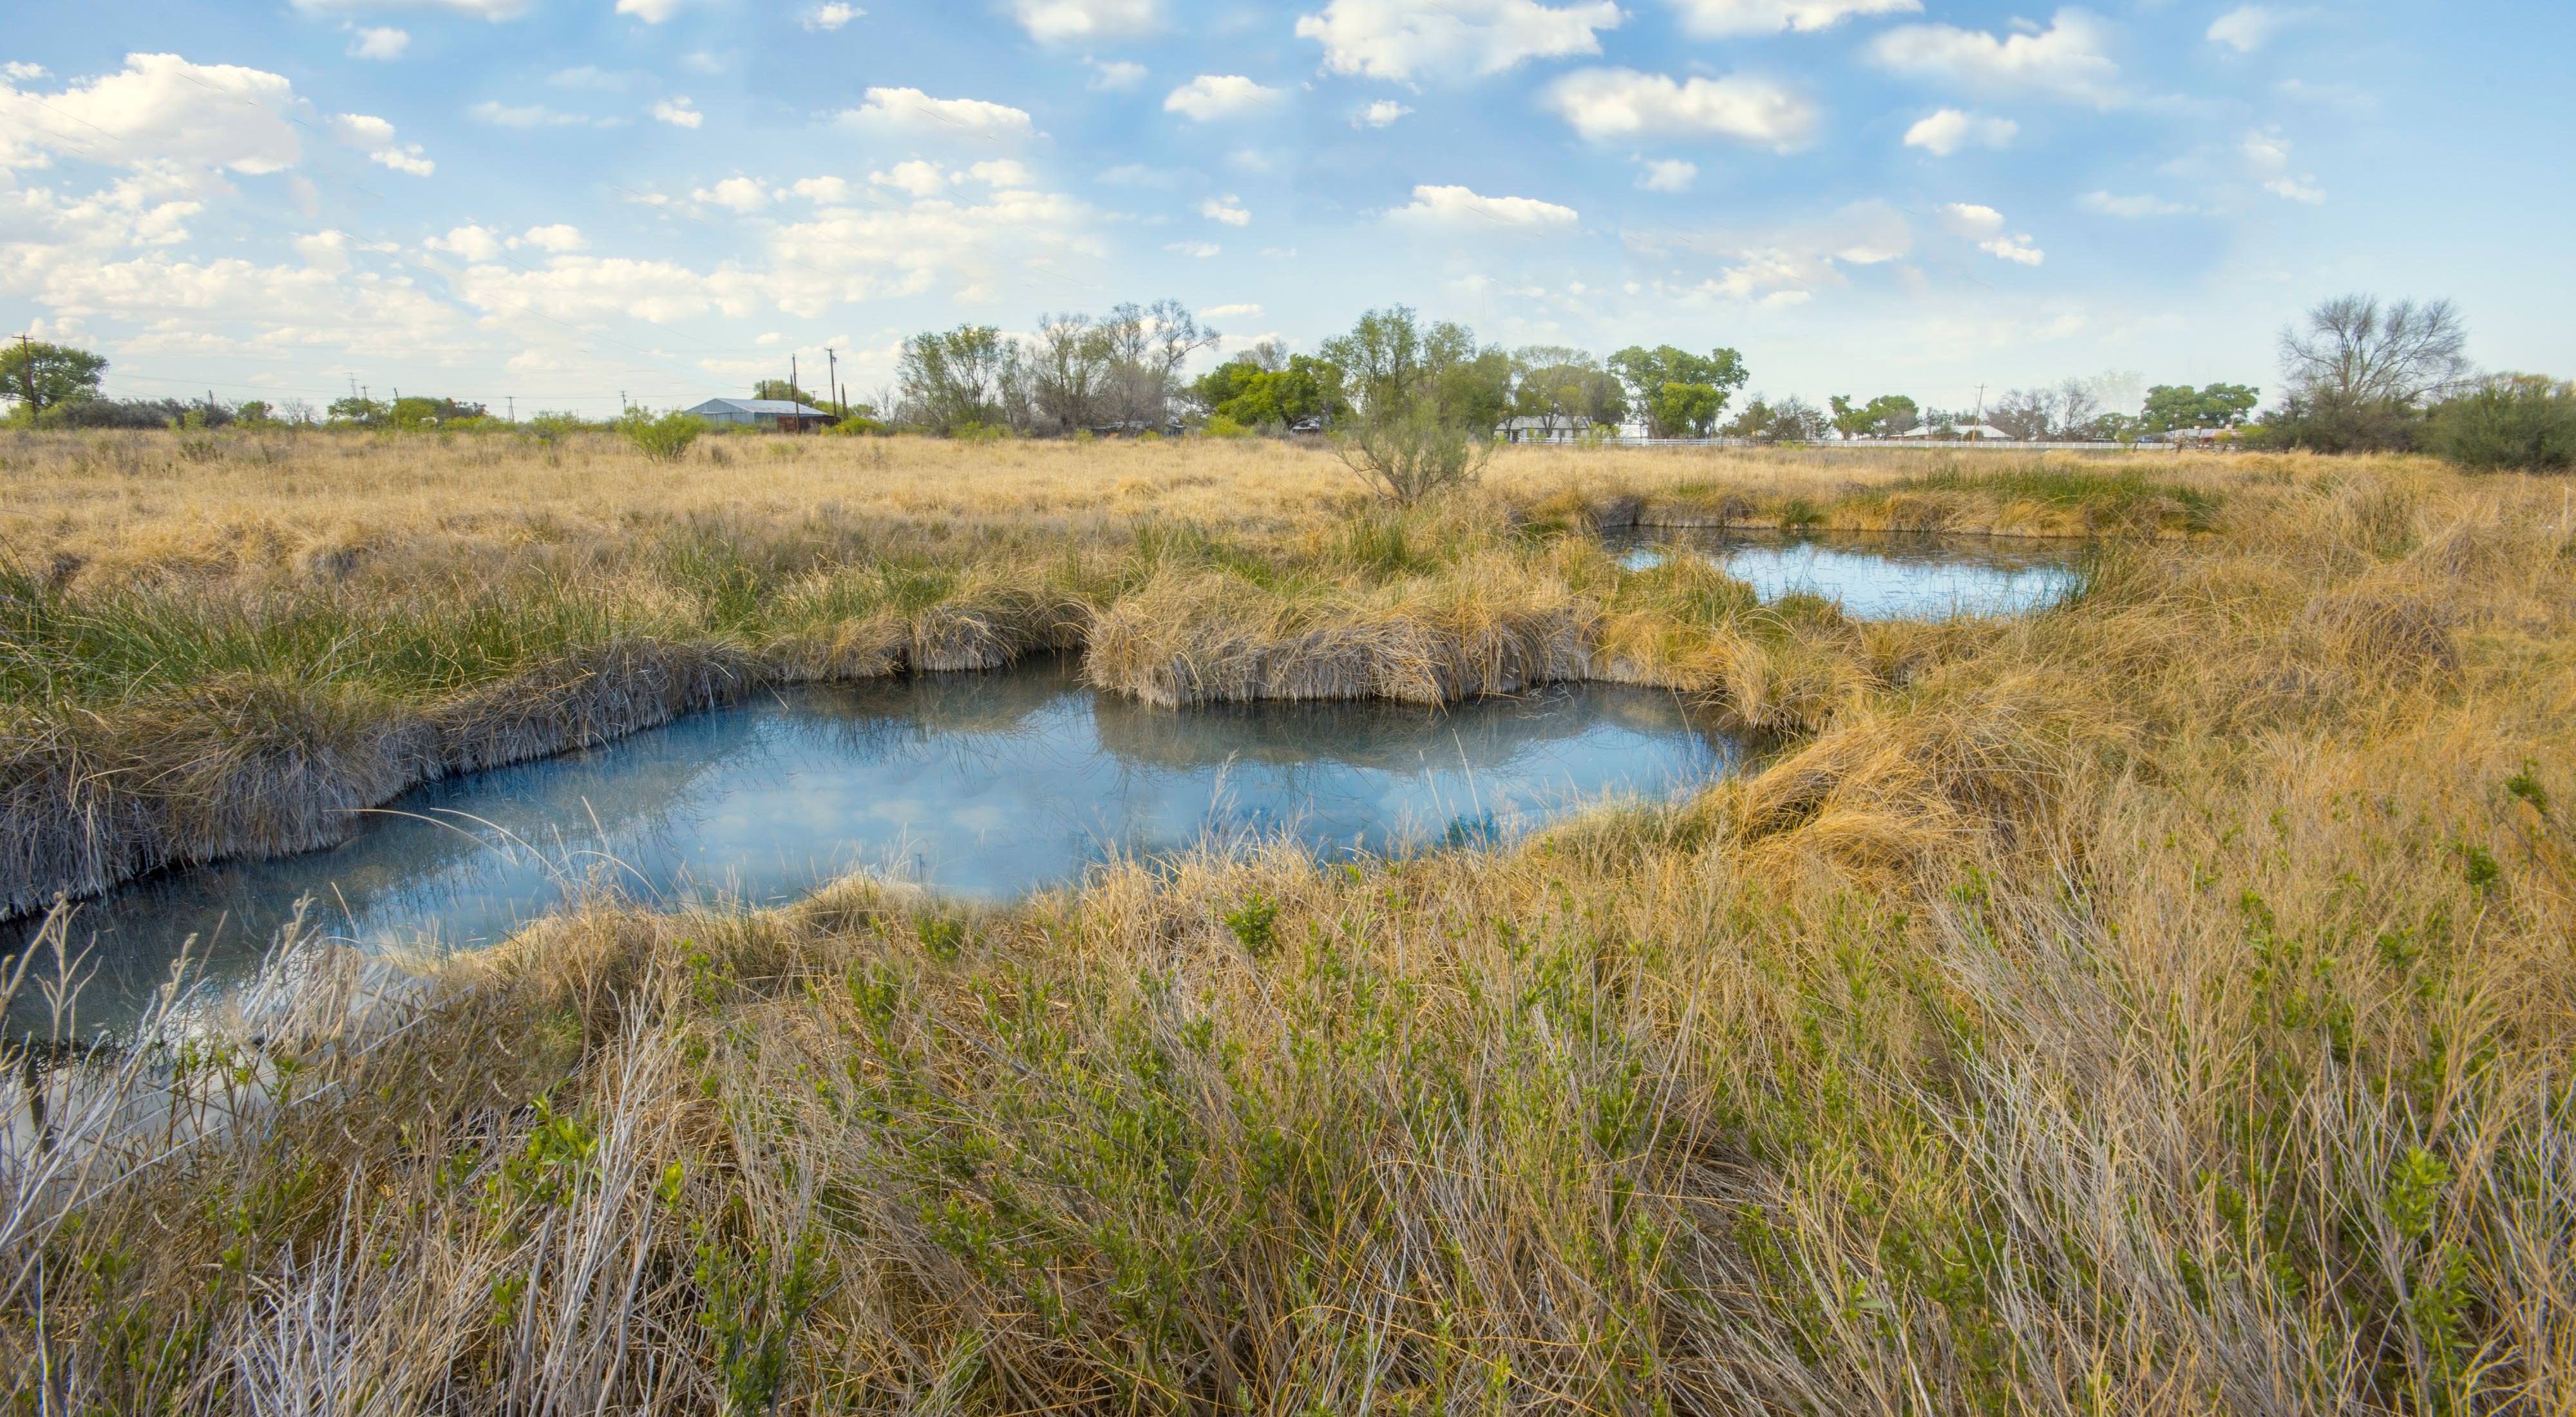 Two clear blue springs are surrounded by tall grass.